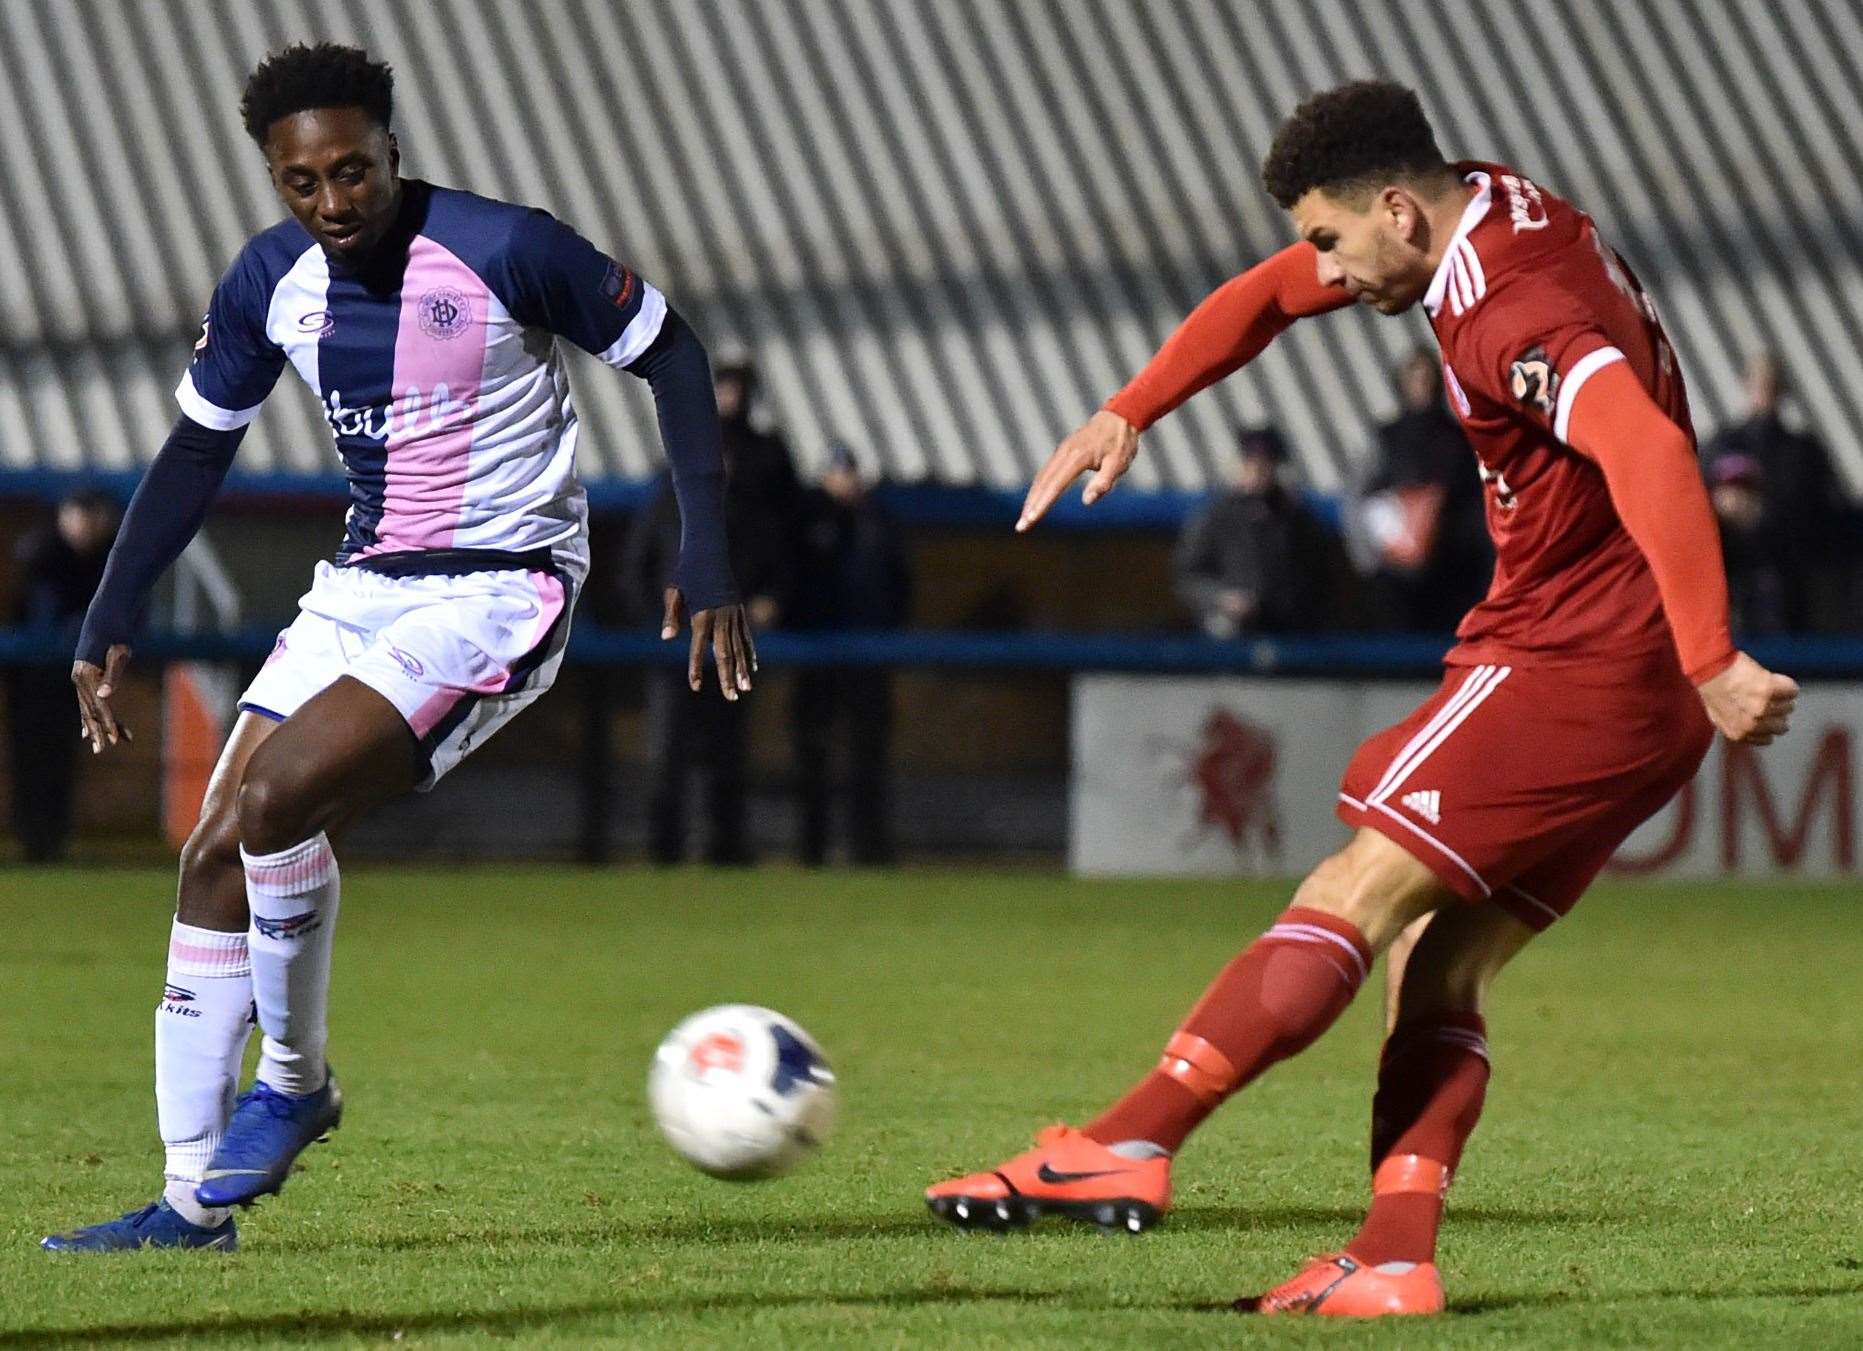 Welling's Nathan Green goes close in the second half. Picture: Keith Gillard